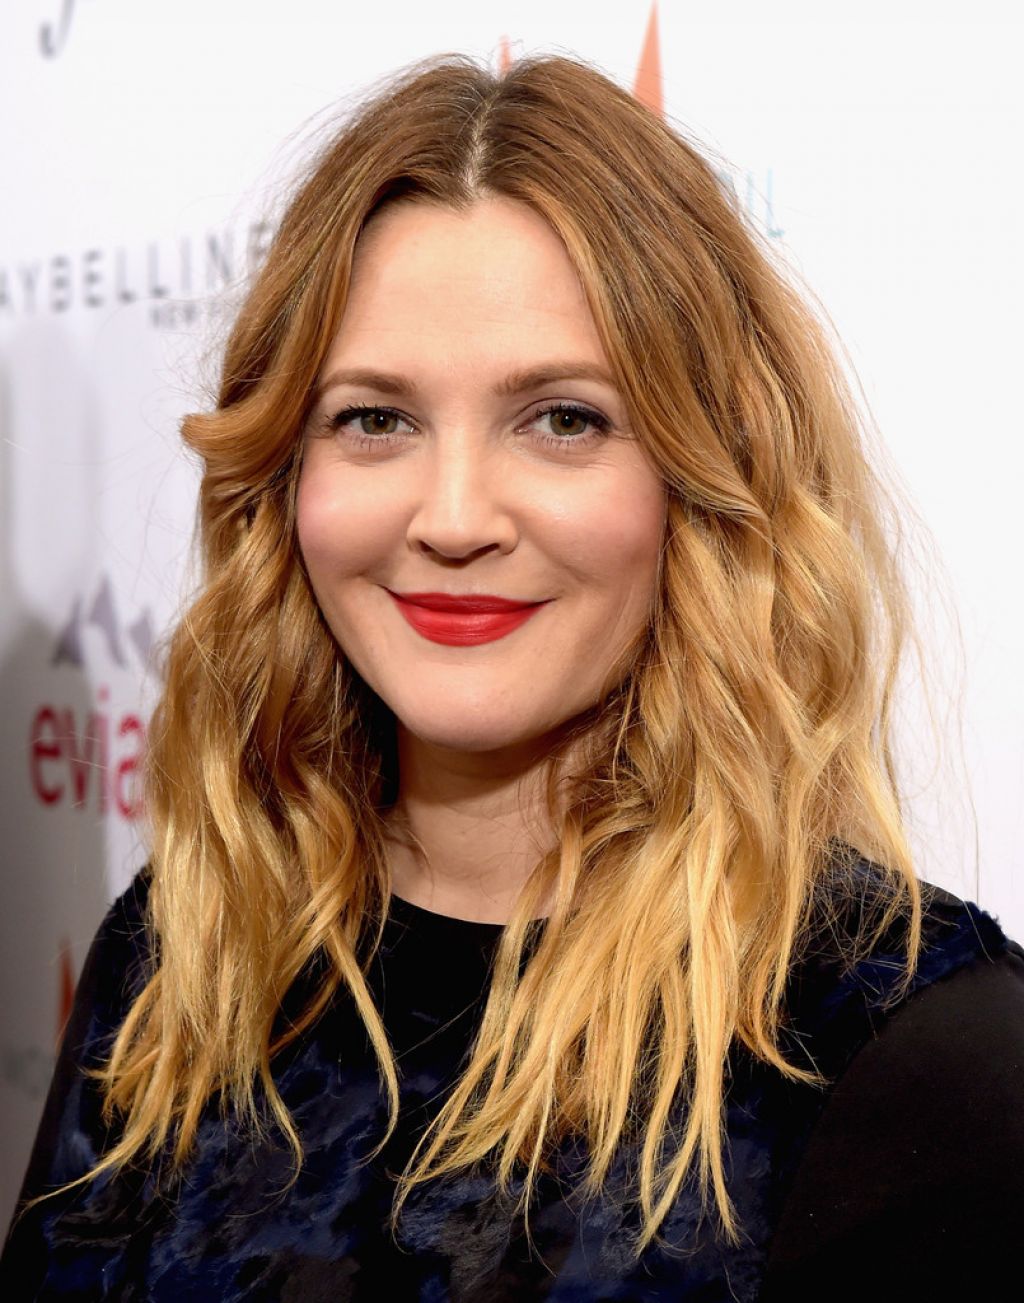 Drew Barrymore ‘Fashion Los Angeles Awards’ Show in Los Angeles